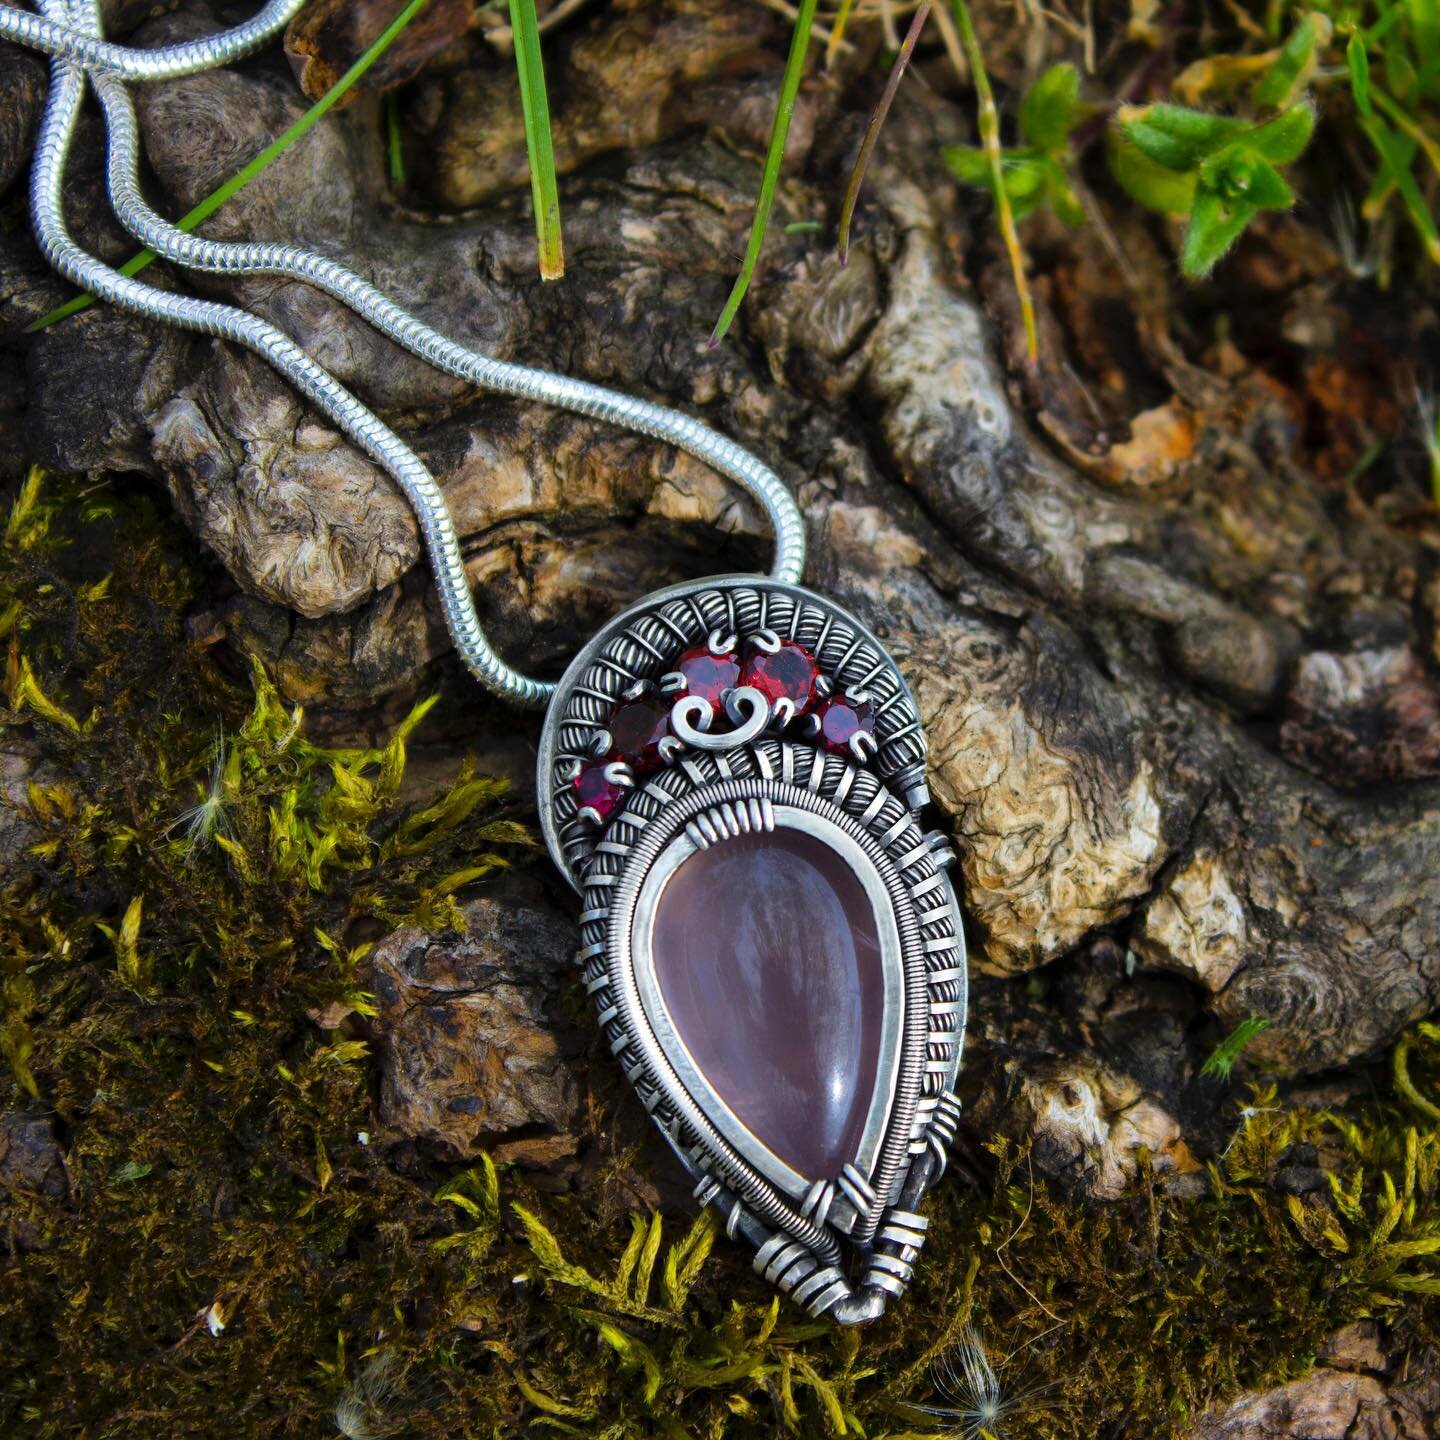 This Rose Quartz has a crown of garnets! 👑 That makes it royalty, right? 

Took some new photos of this one and I just love to see it in the sun. This one&rsquo;s still searching for the right home and is currently on ⛵️!! 
.
.
.
.
.
.
#wirewrap #ro